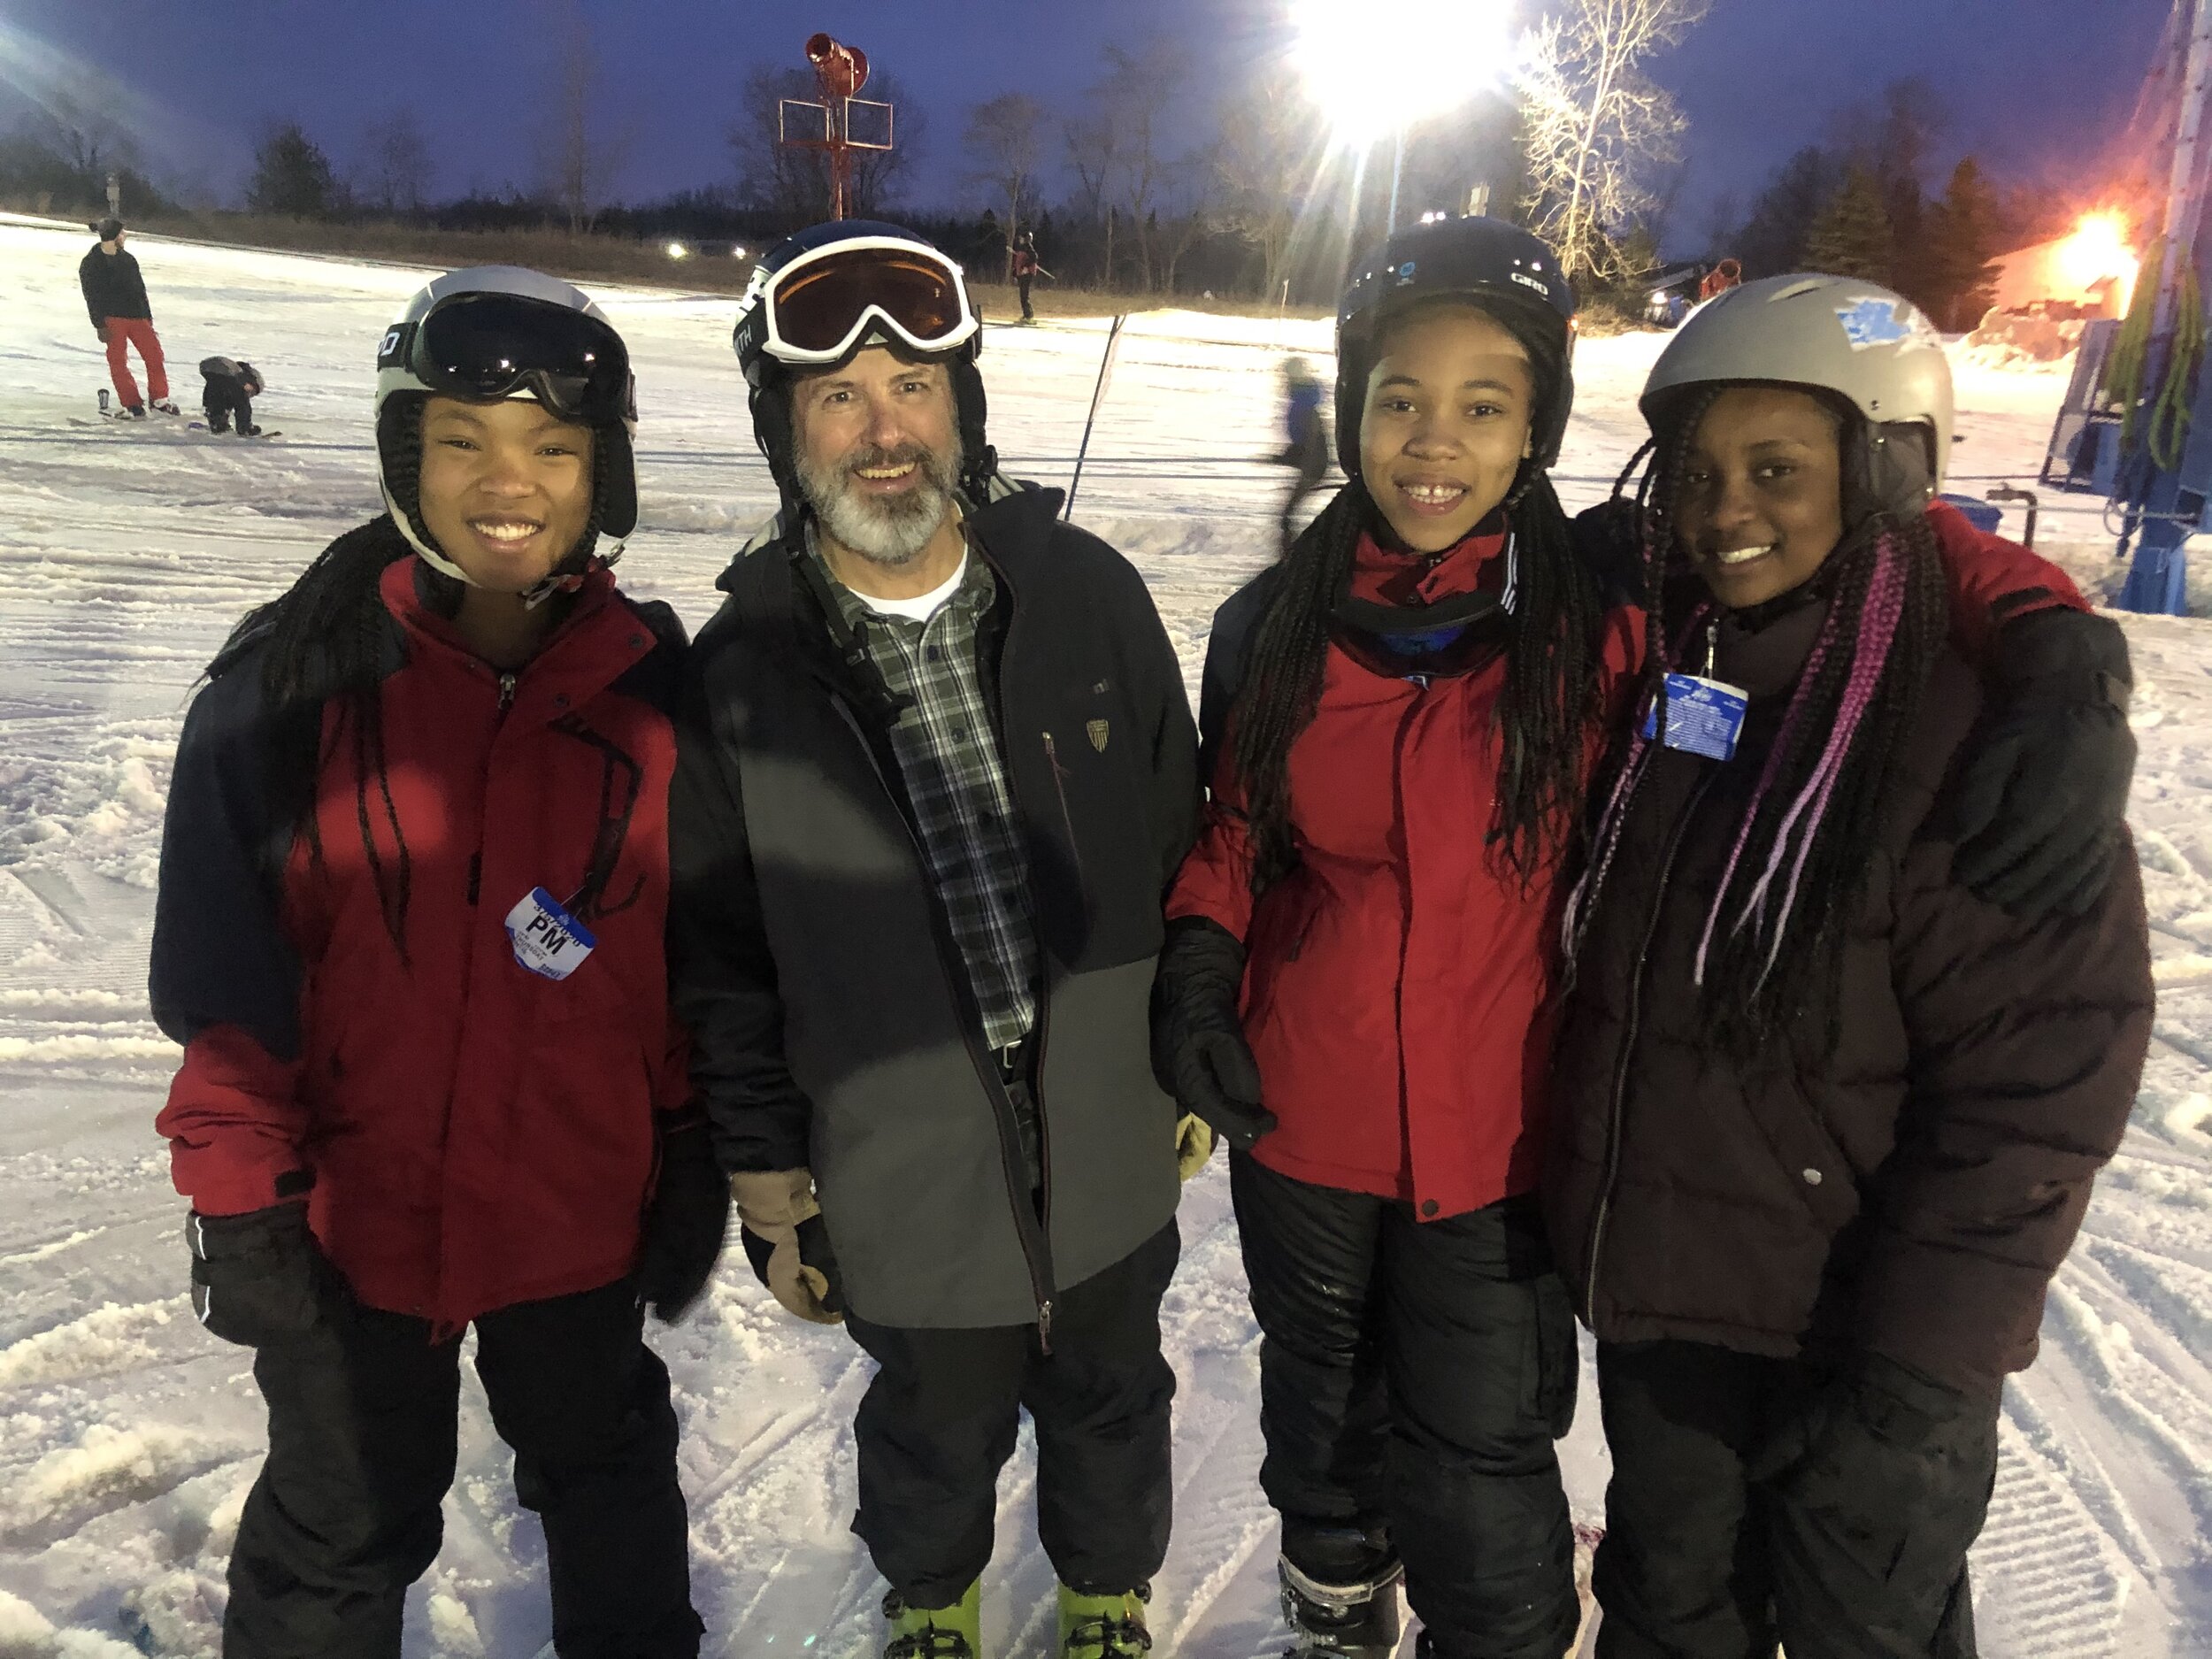 YMCA of Greater Flint participants geared up for an evening on the slopes